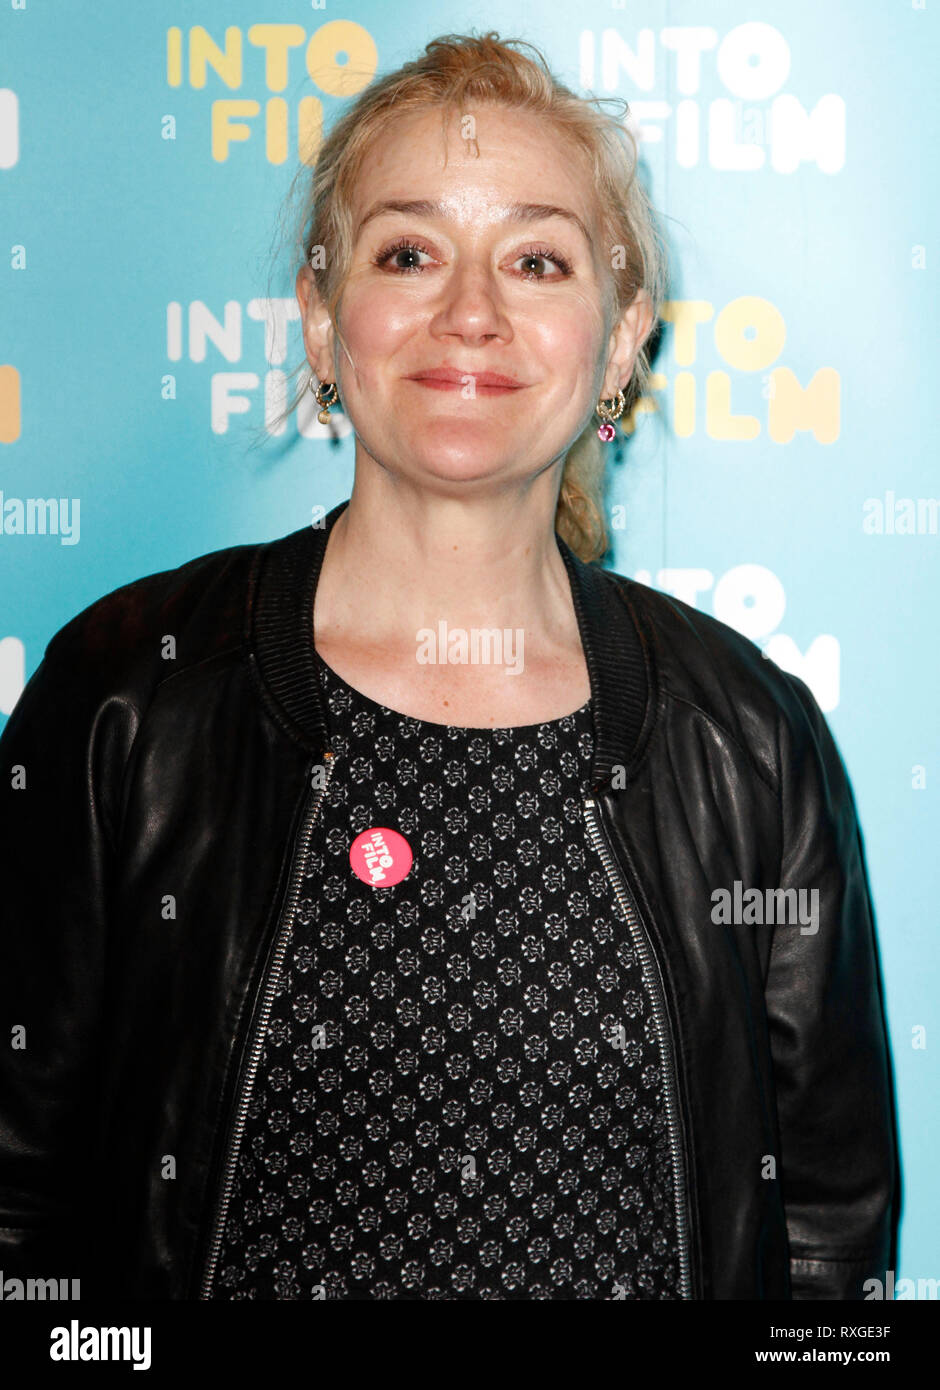 Mar 24, 2015 - London, England, UK - Into Film Awards 2015, Empire Cinema, Leicester Square - Red Carpet Arrivals Photo Shows: Sophie Thompson Stock Photo